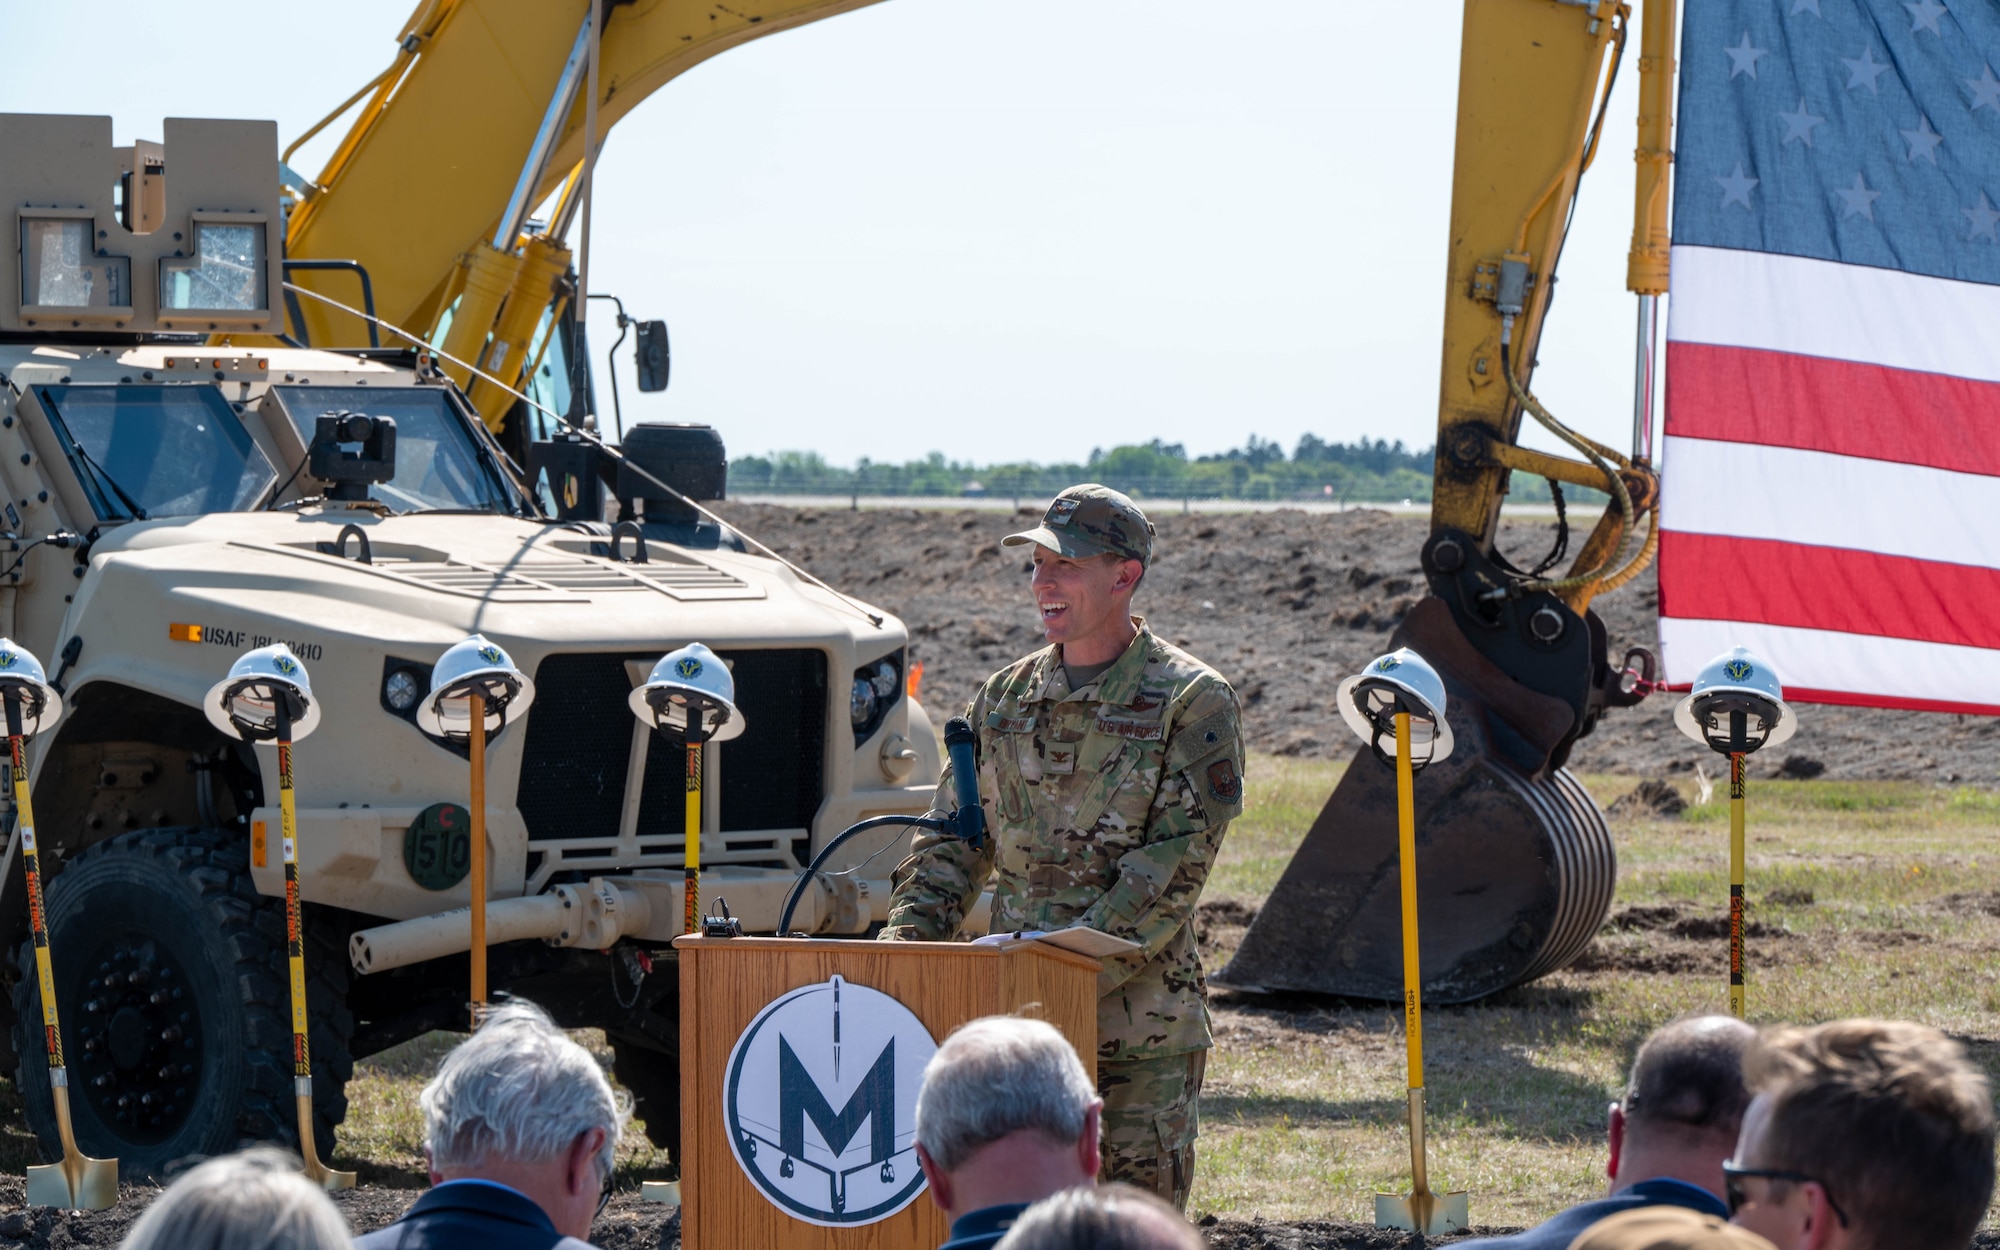 Col. Philip Bryant, commander of the 582nd Helicopter Group, gives remarks at the groundbreaking ceremony for the 54th Helicopter Squadron’s new facility Aug. 16, 2023, at Minot Air Force Base, North Dakota. The new facility will consist of three maintenance hangar bays, six aircraft shelter bays and three hangar bays for aircraft on alert. (U.S. Air Force photo by Senior Airman Evan Lichtenhan)